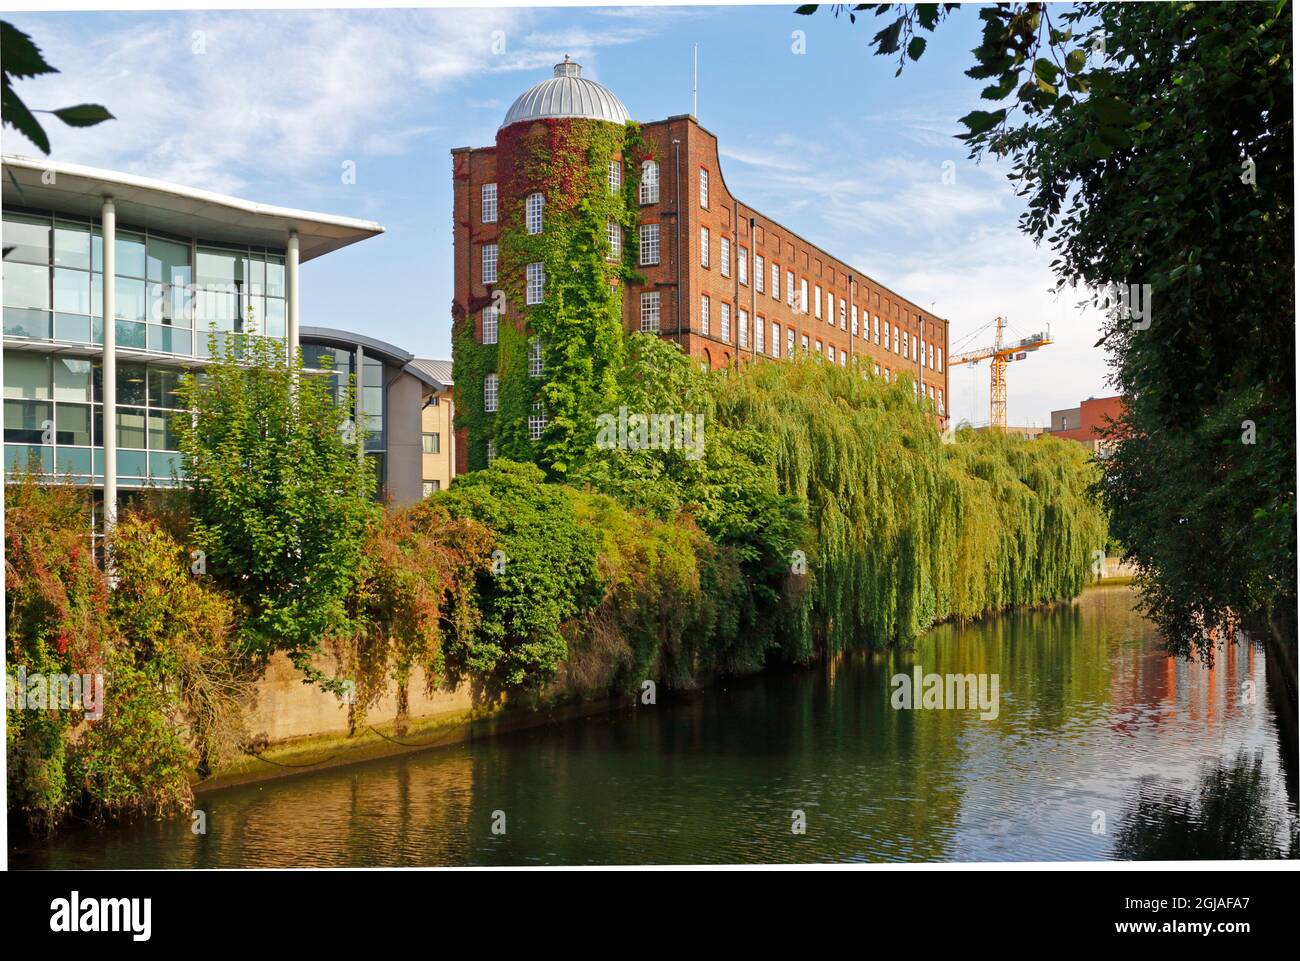 A view of the 19th century St James Mill by the River Wensum downstream of Whitefriars Bridge in the City of Norwich, Norfolk, United Kingdom. Stock Photo